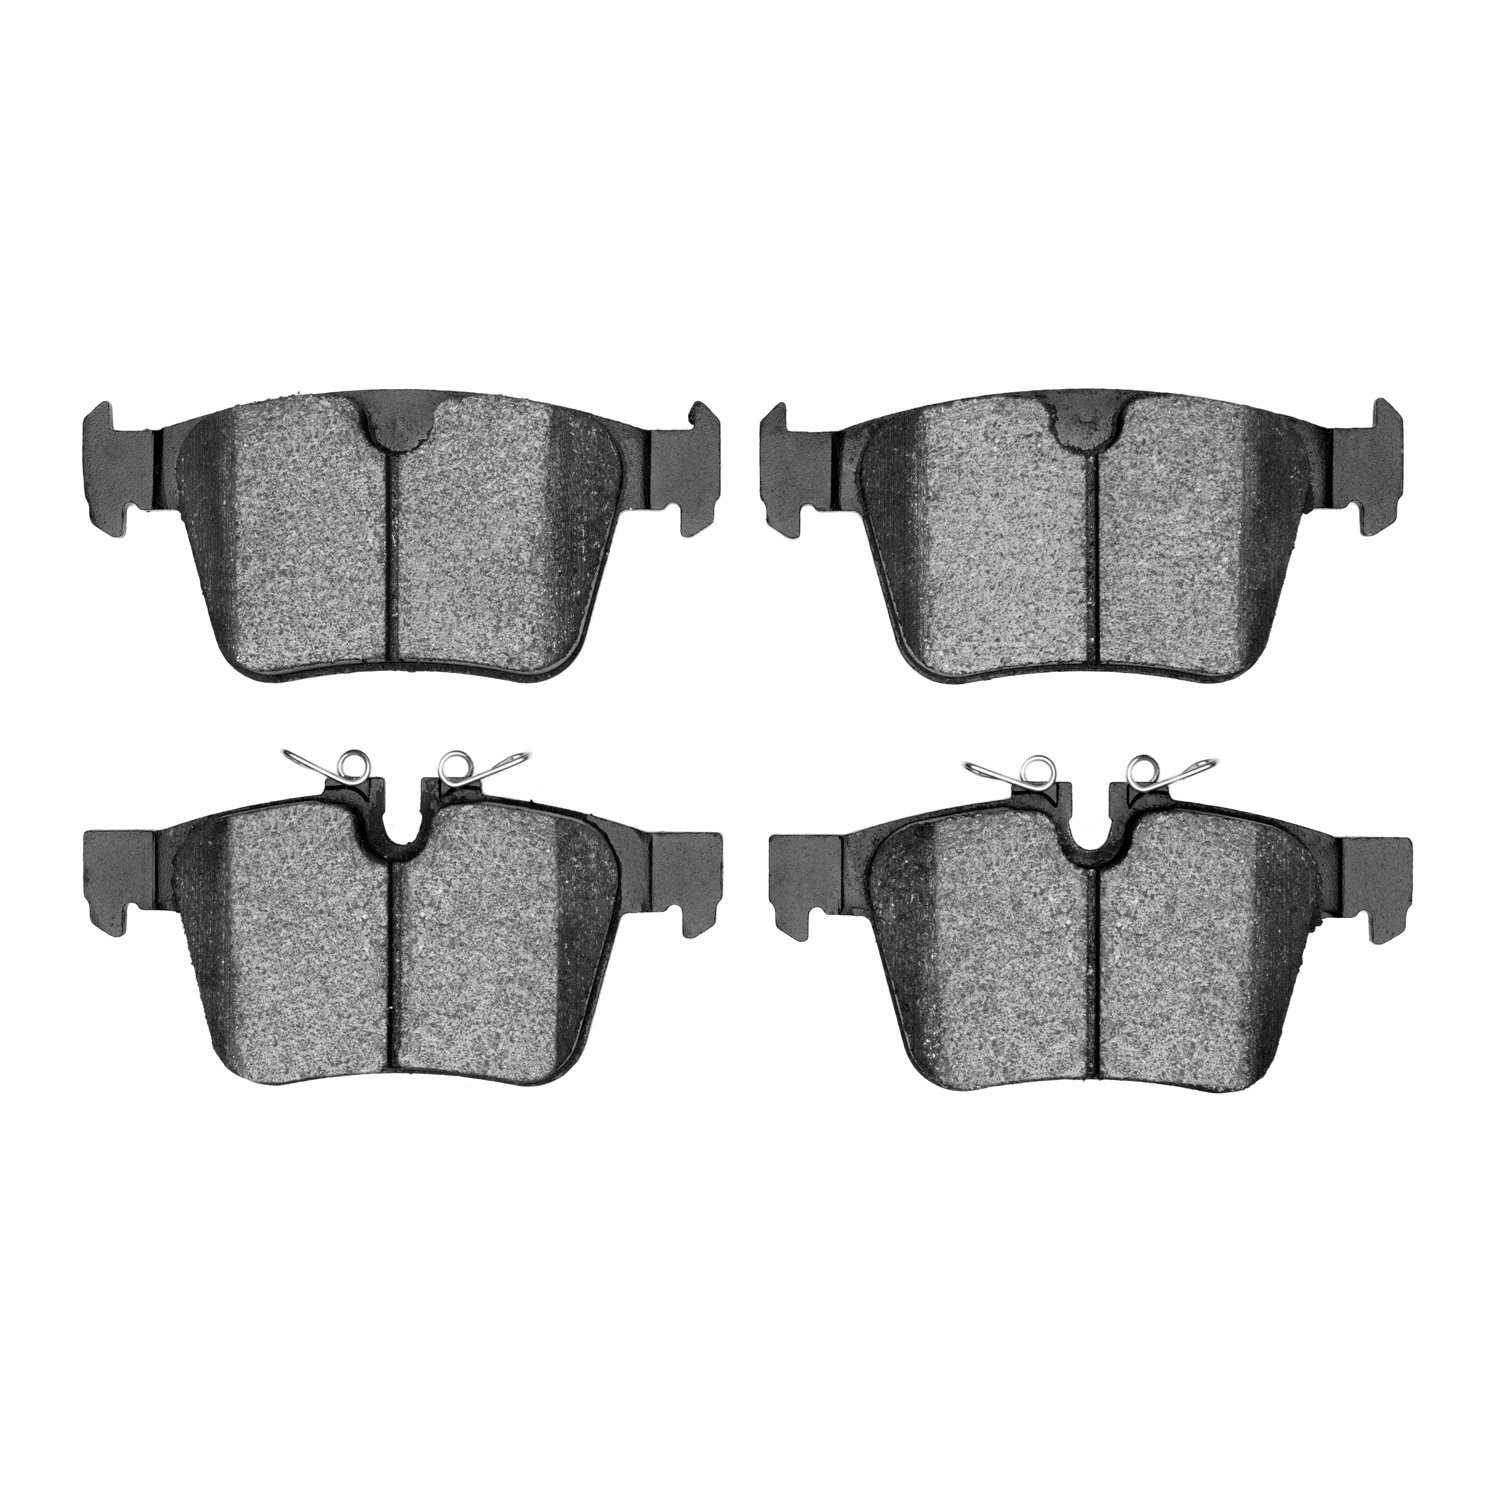 1552-1821-00 5000 Advanced Low-Metallic Brake Pads, Fits Select Multiple Makes/Models, Position: Rear